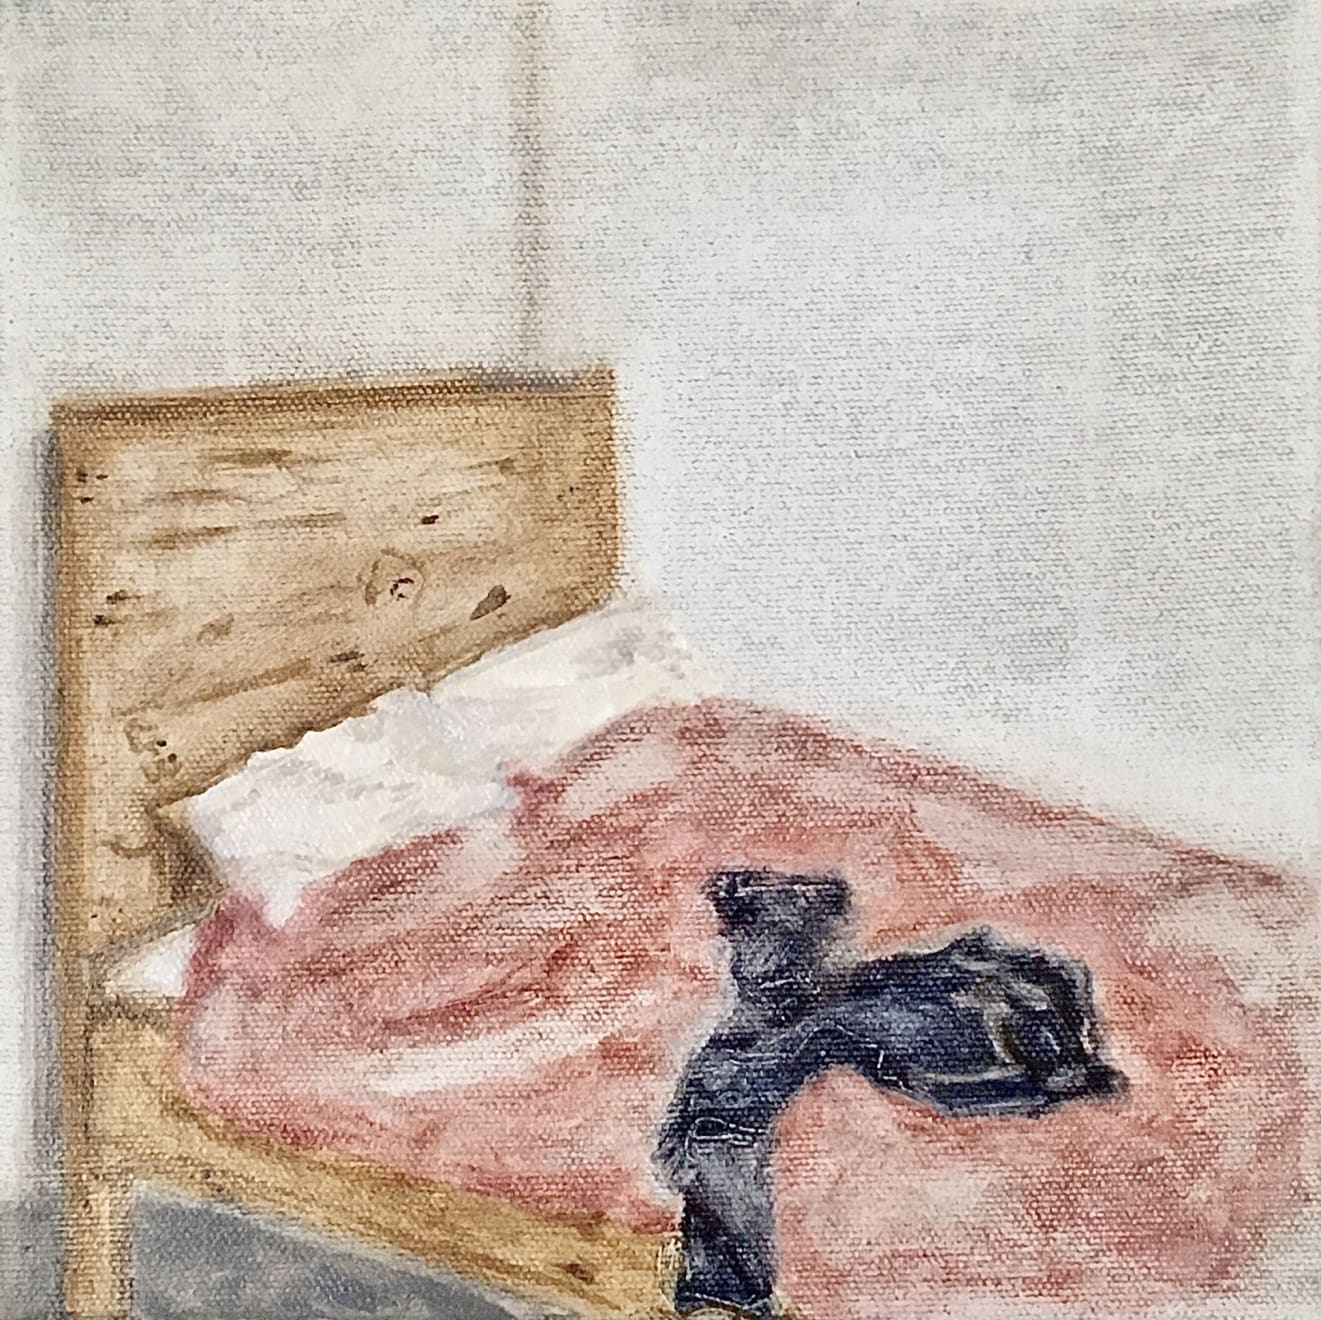 Elynor Smithwick The Bed Oil on Canvas Original 20 x 20 cm $750 £375 SOLD